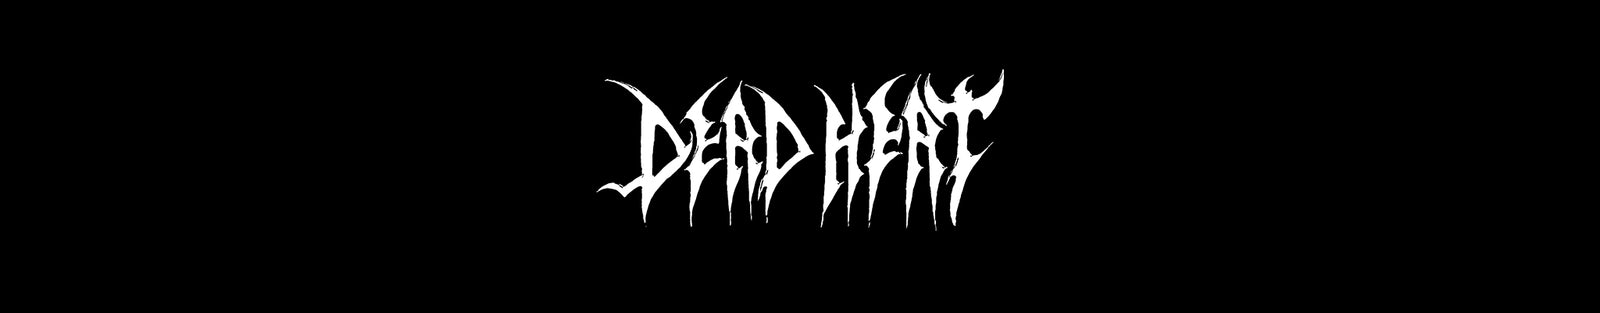 DEAD HEAT - Official Merch Store - Evil Greed